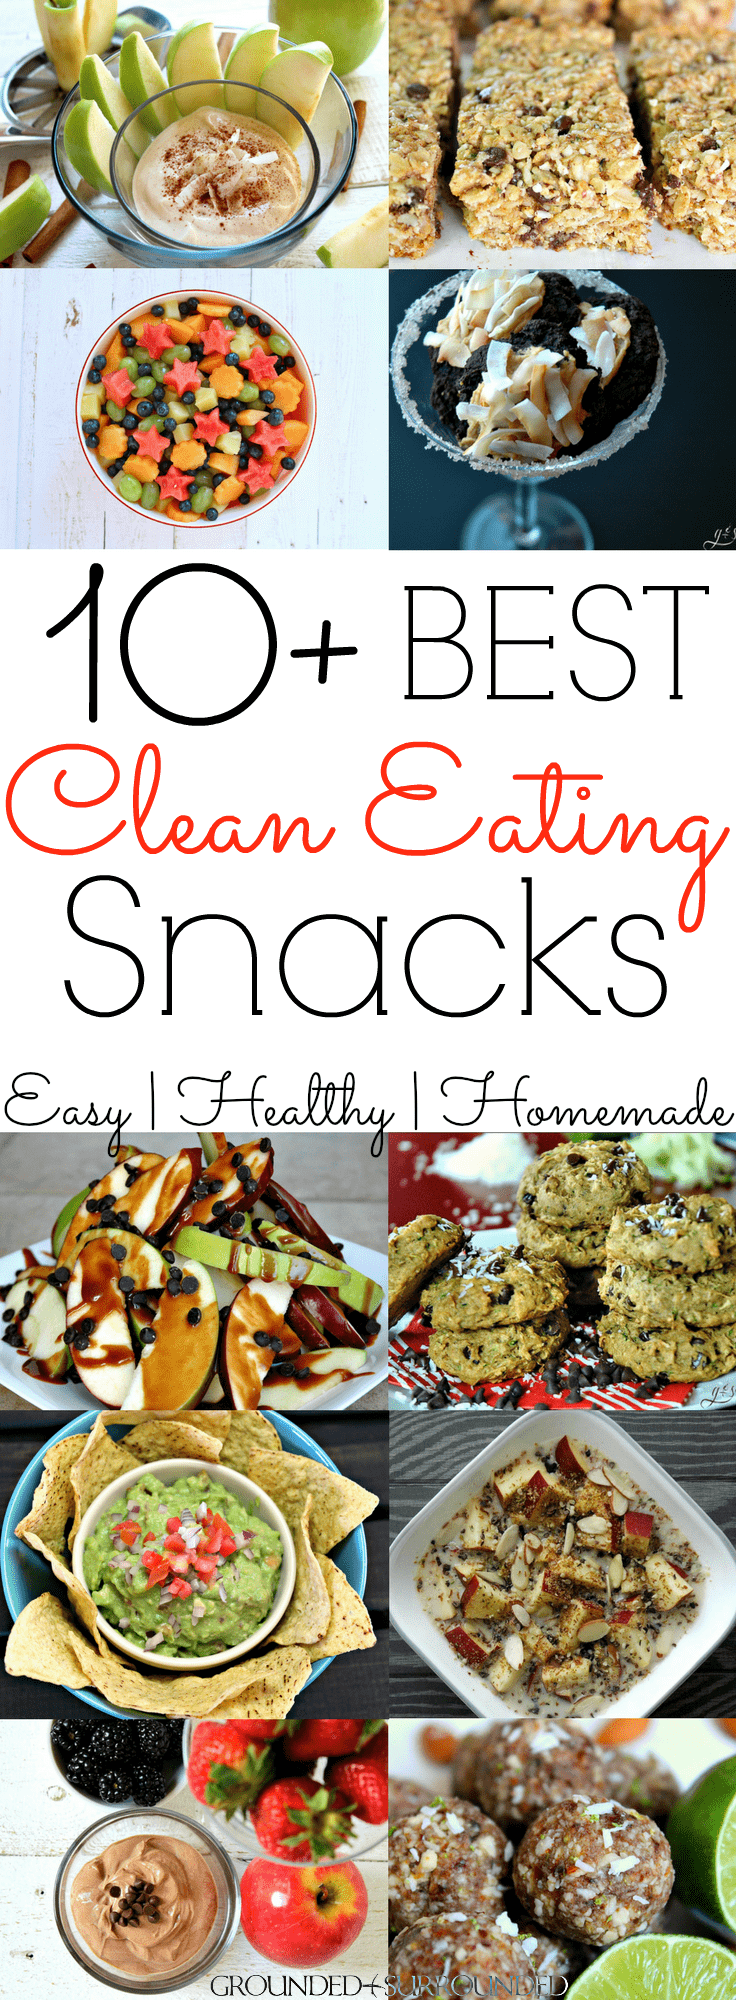 10+ Clean Eating Snack Recipes | Aren't we all looking for easy and quick snacks to take with us on the go or to lose weight (for weightloss). Homemade snacks are always the best, but sometimes we have to settle for store bought. Whether you fancy sweet or savory low carb ideas these will provide you with protein and fiber to keep you full! These healthy snacks are also great for kids, toddlers, teens and everyone in between. 